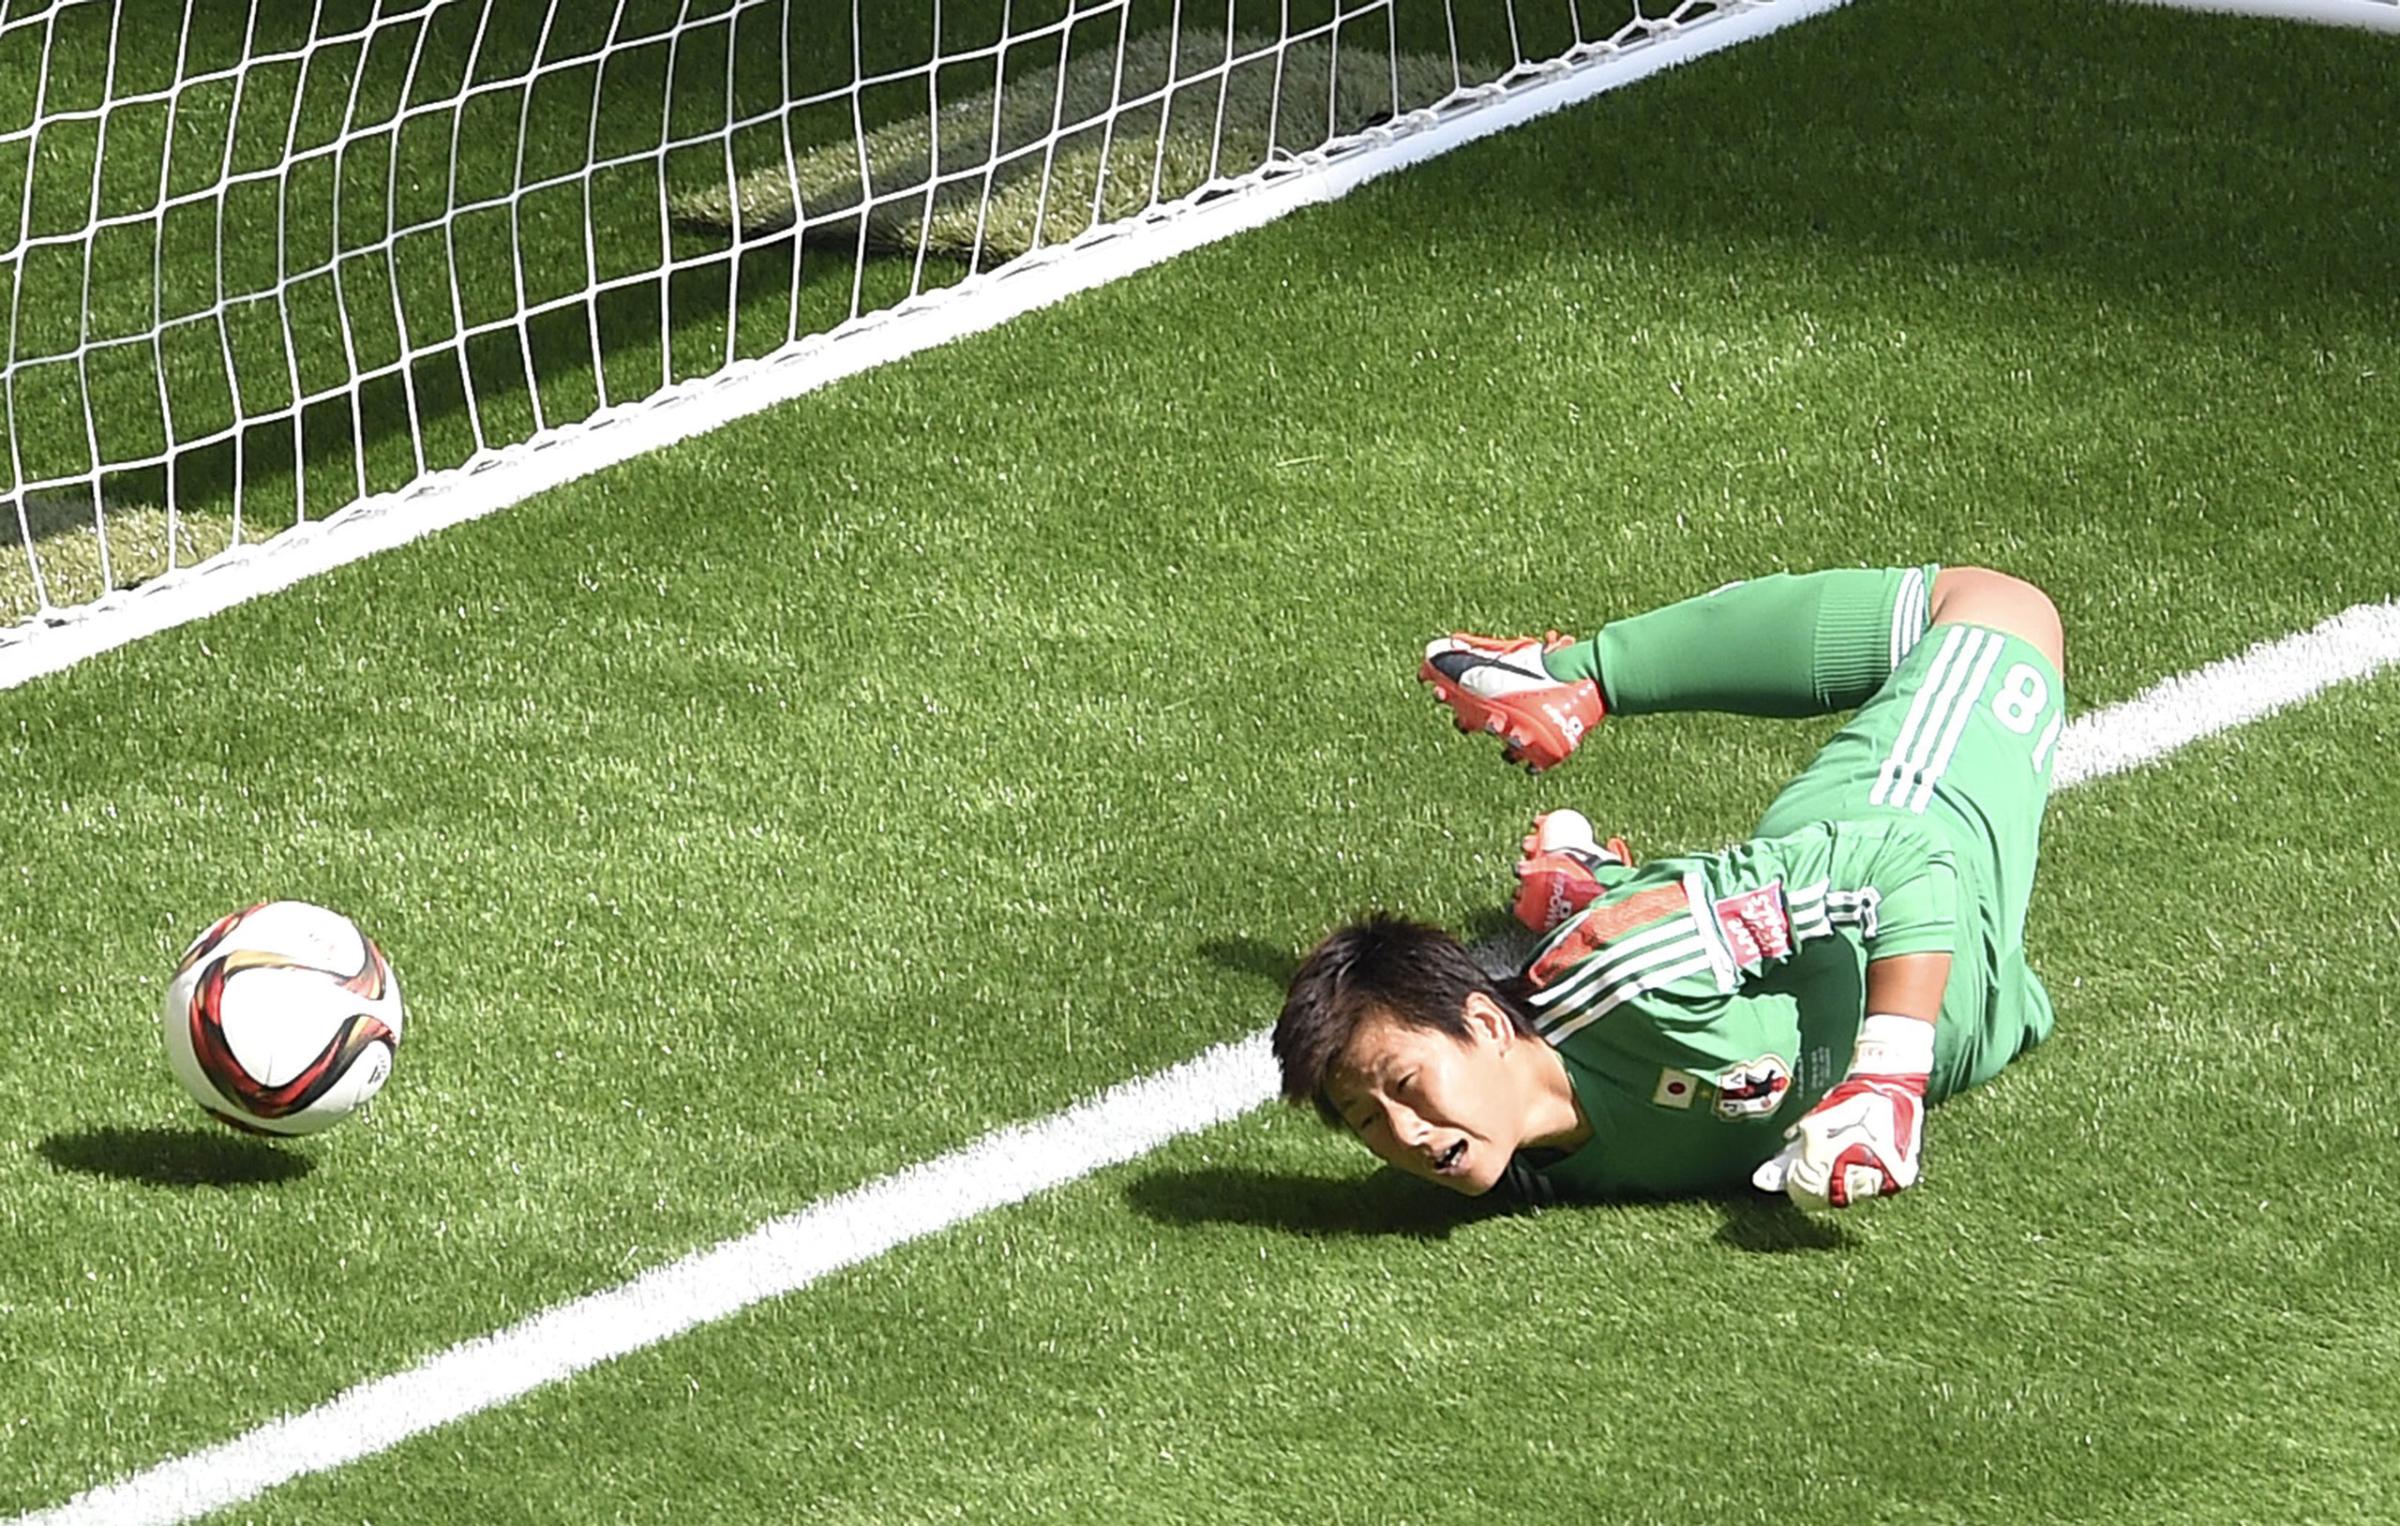 Japan's goalkeeper Kaihori Ayumi fails to hold the ball during the FIFA Women's World Cup 2015 final match between USA and Japan, at BC Place Stadium in Vancouver, Canada, 05 July 2015. The USA won the match.